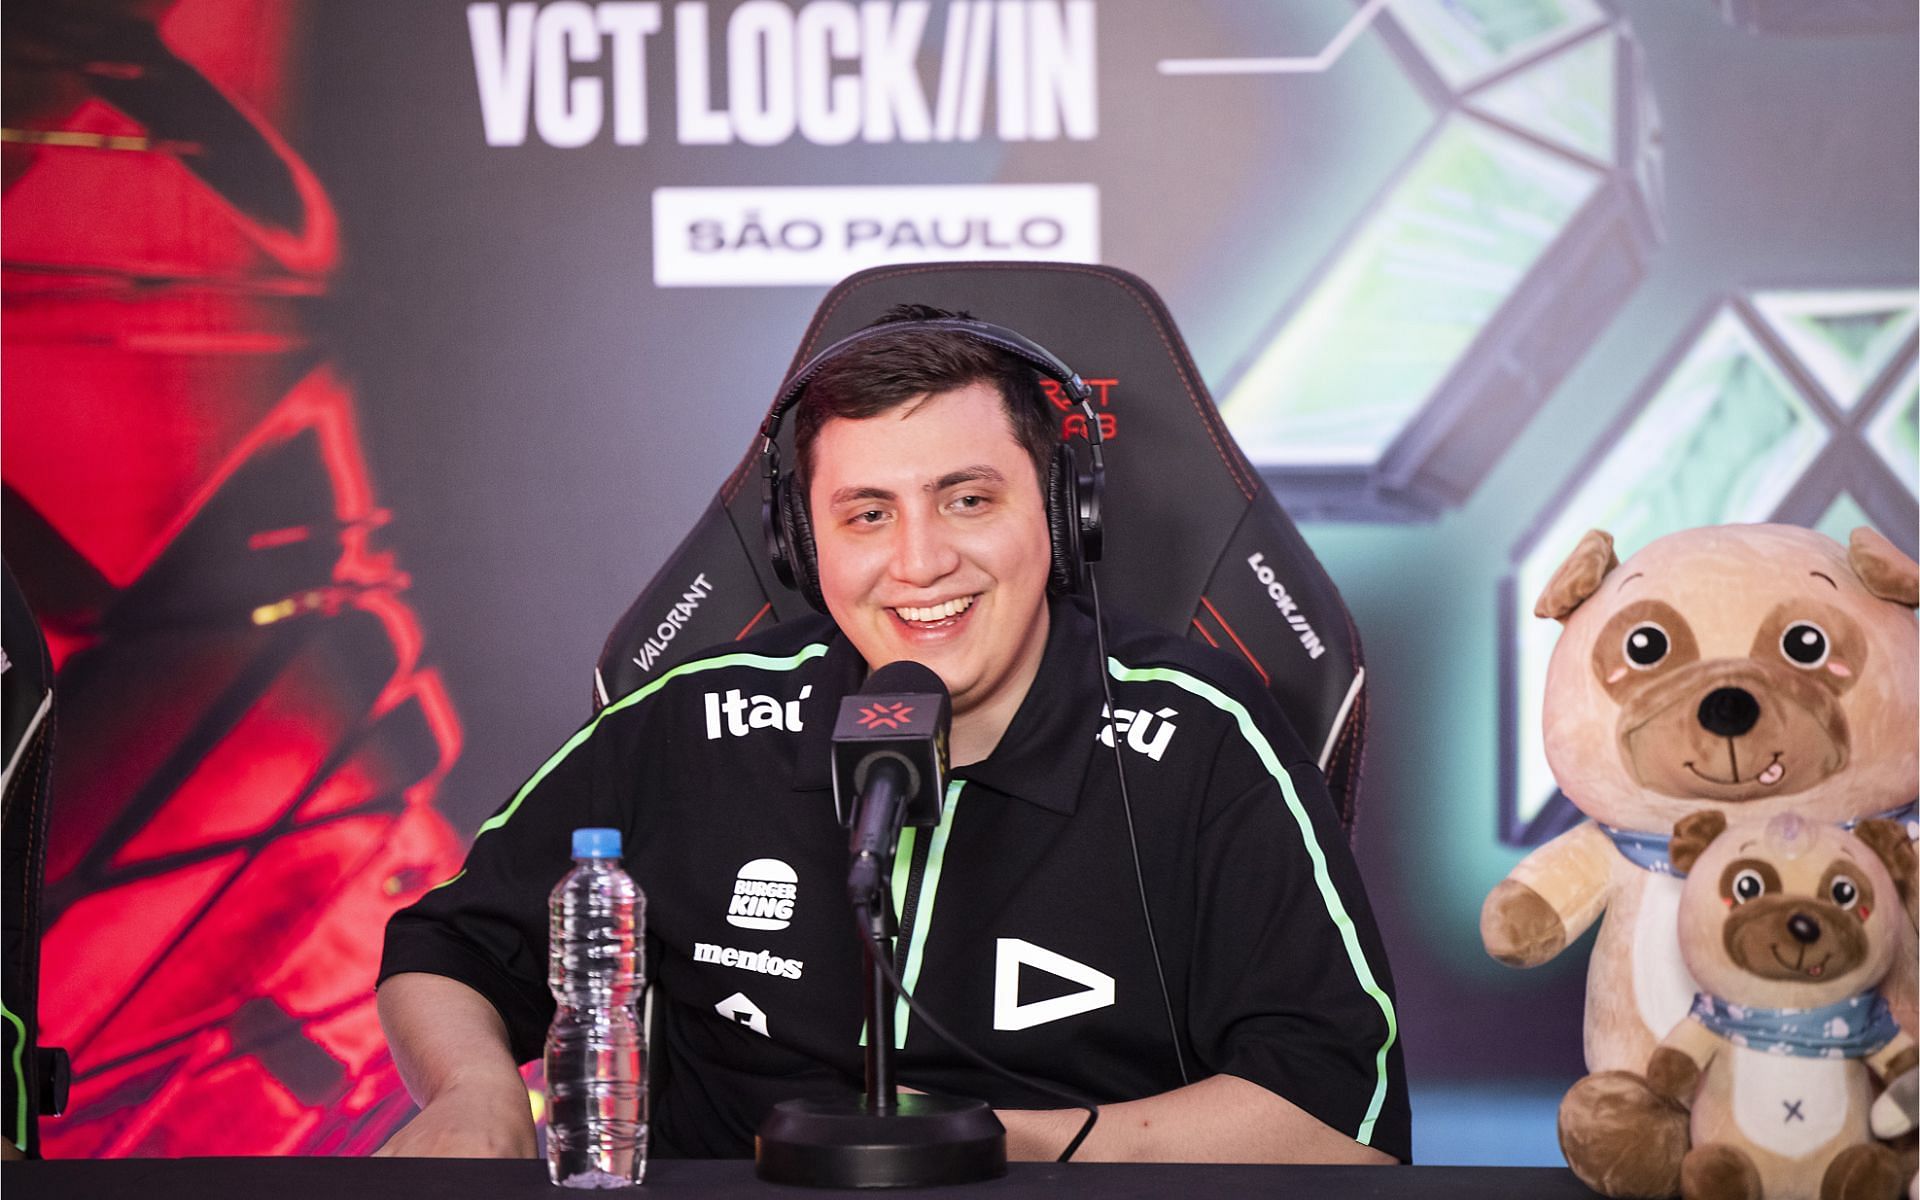 Saadhak from LOUD at VCT LOCK//IN post-game press con (Image via Riot)